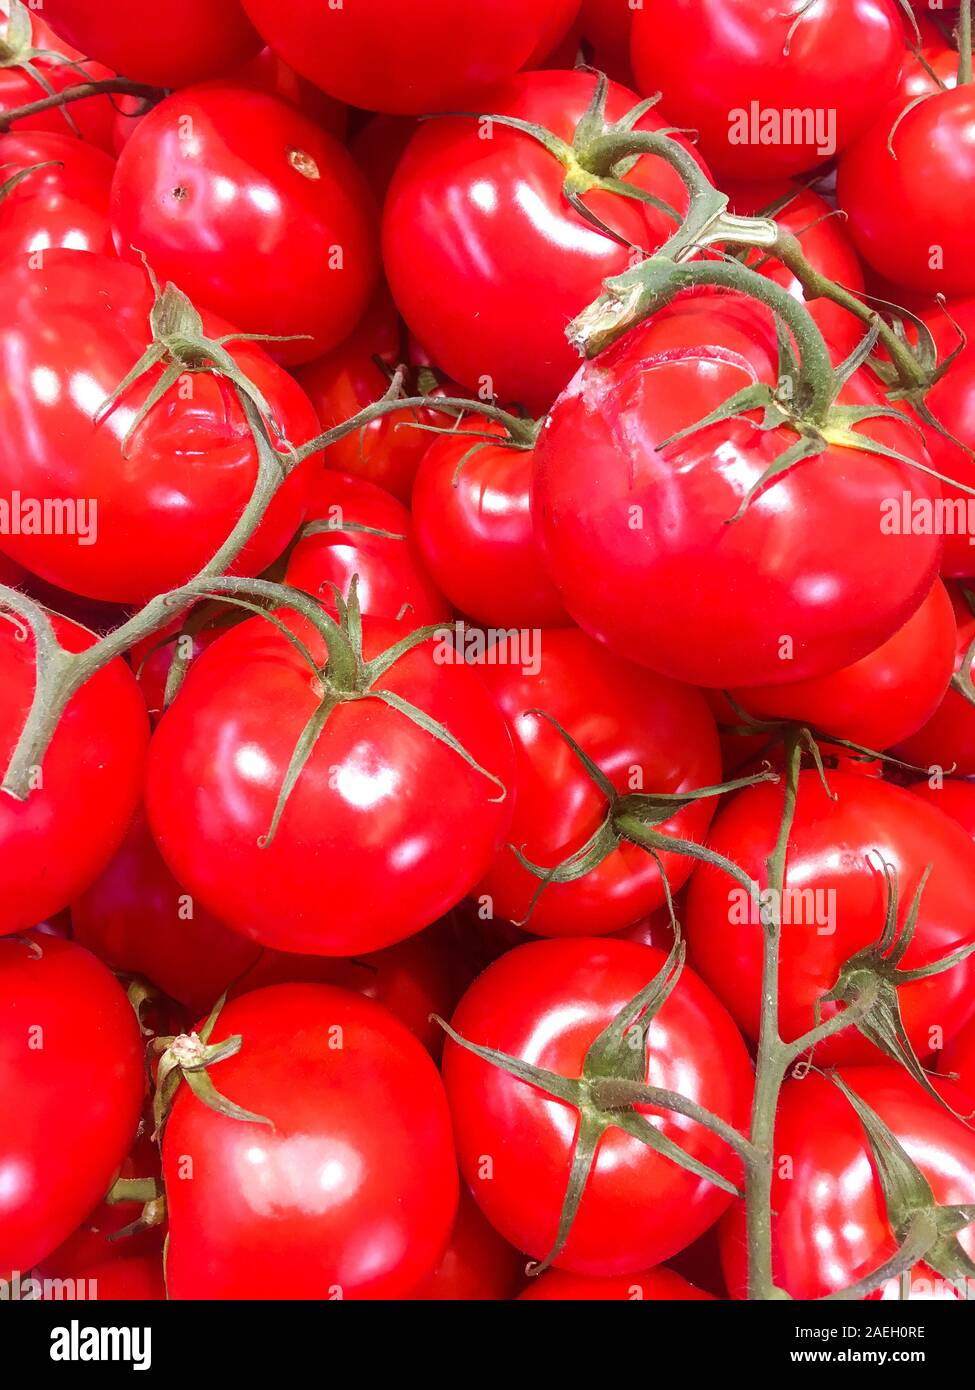 Trusses of tomatoes, supermarket, Lyon, France Stock Photo